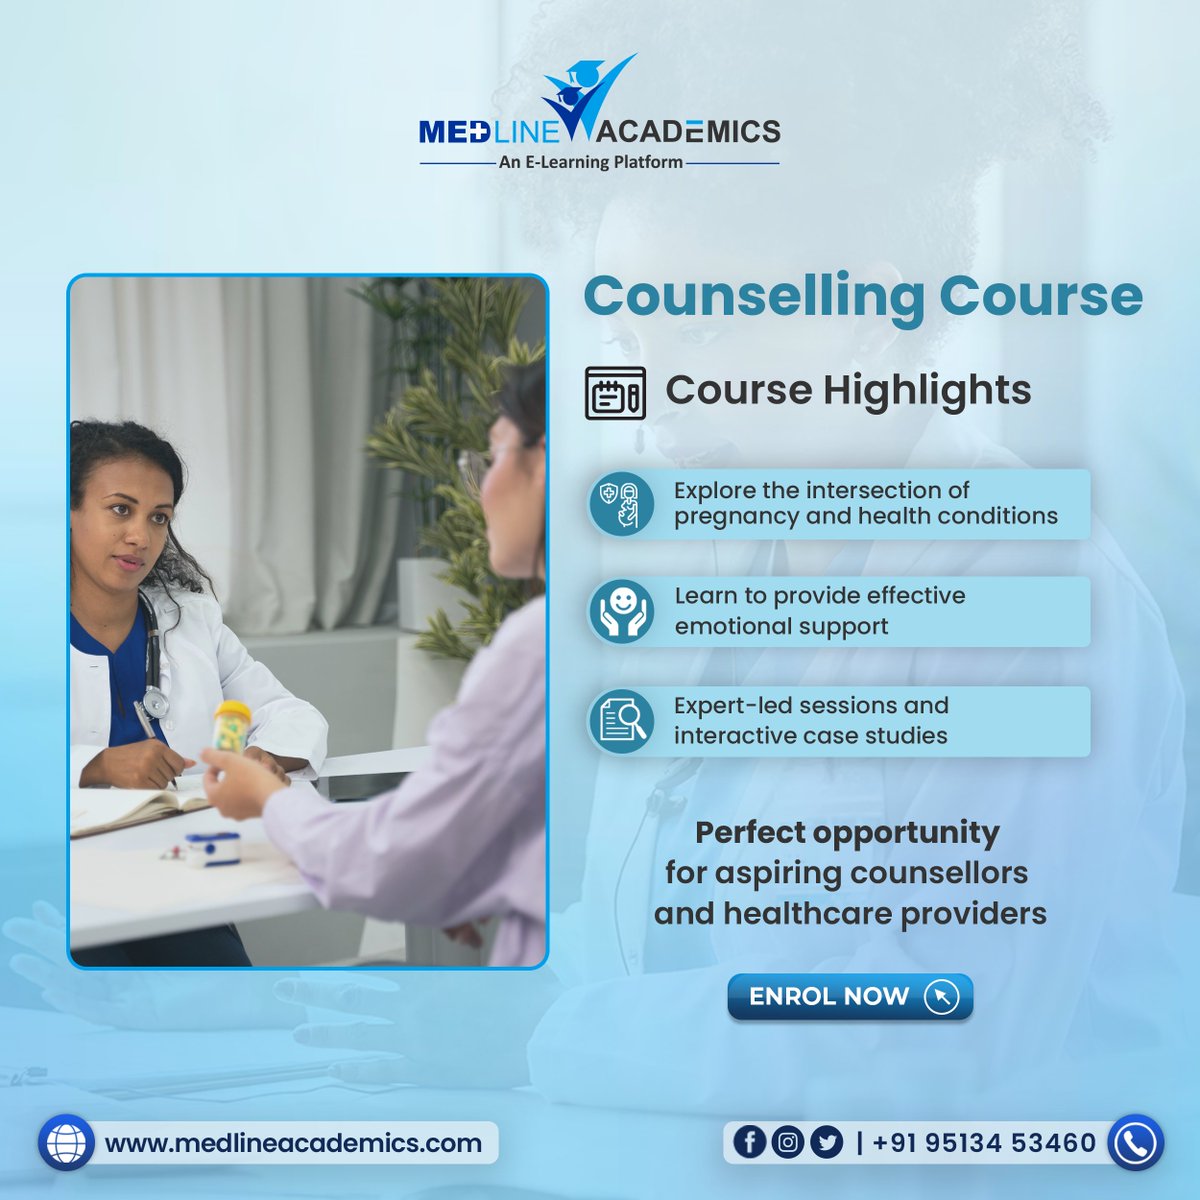 Our brand-new Counselling course is here to equip you with the tools to make a significant impact in the lives of expecting mothers dealing with co-morbidities during pregnancy.

Visit: medlineacademics.com 

#CounsellingCourse #PregnancyCounselling #HealthcareCourses